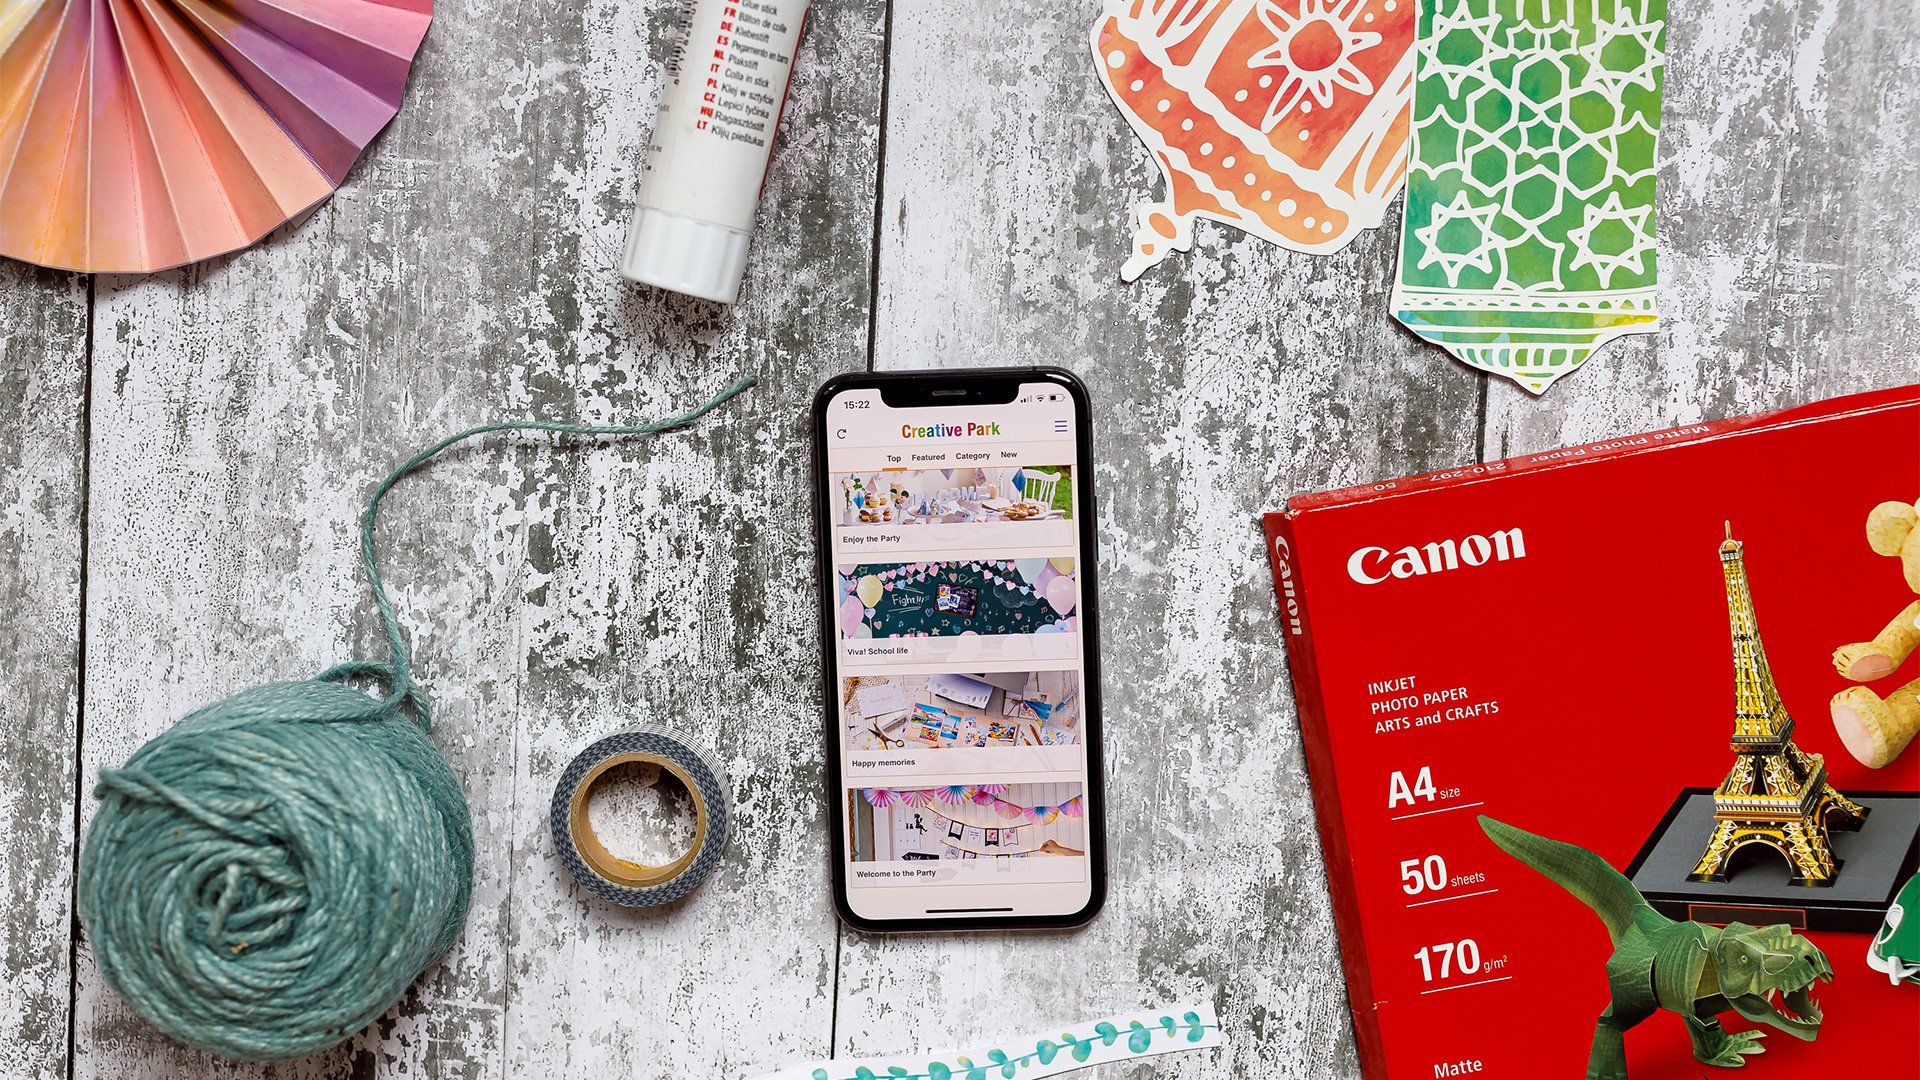 A smartphone displaying the Creative Park app surrounded by Canon printer paper, Creative Park designs and crafting tools.